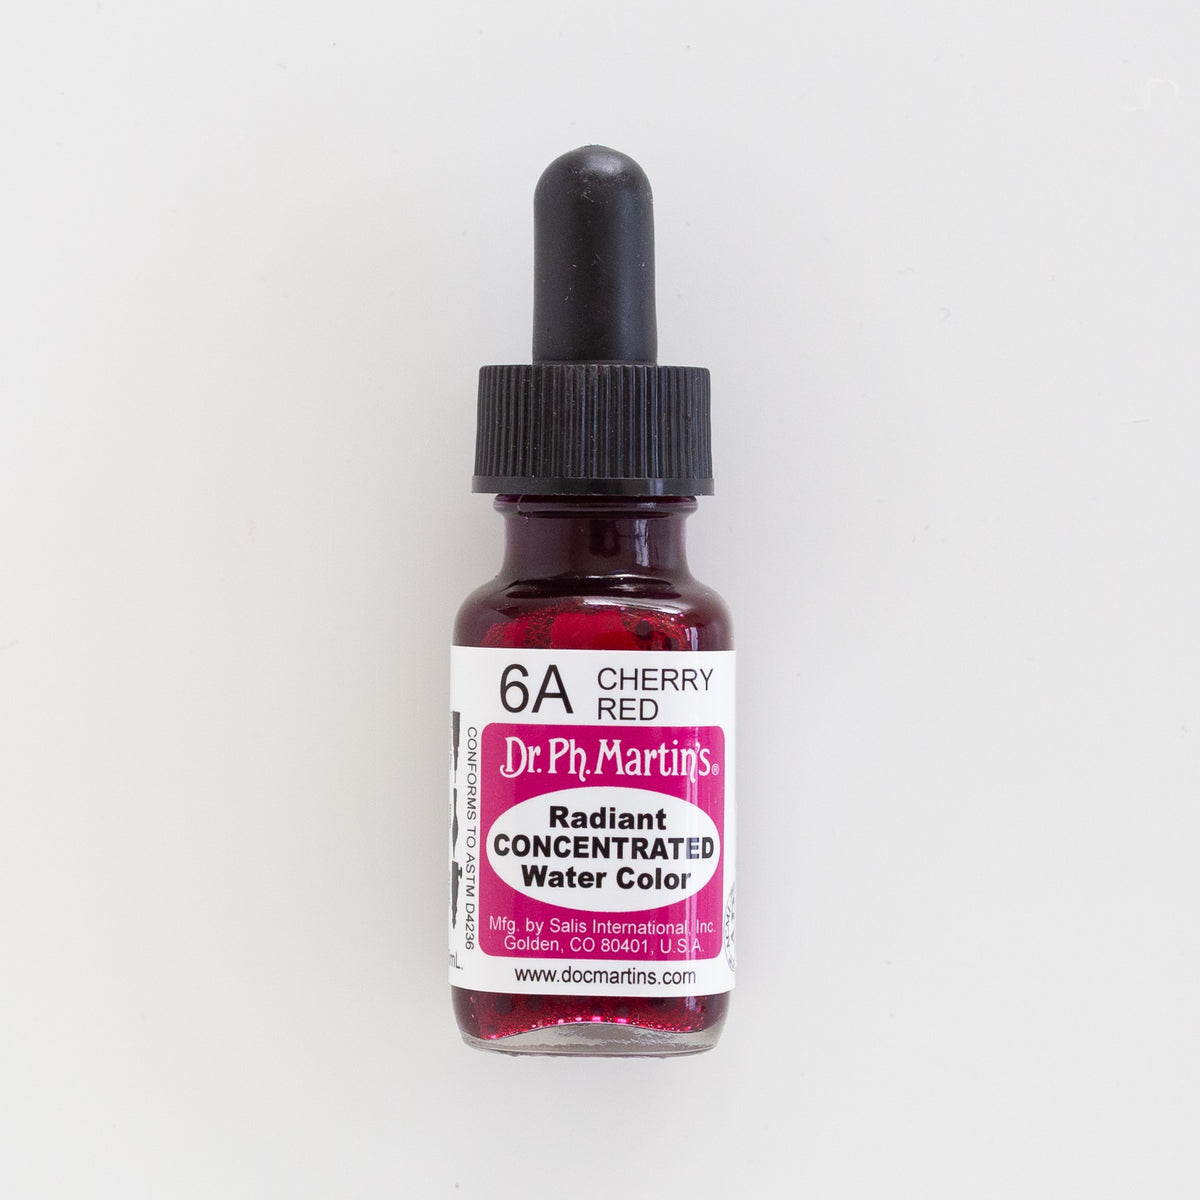 DR. Ph. Martin's Radiant Concentrated 6A Cherry Red